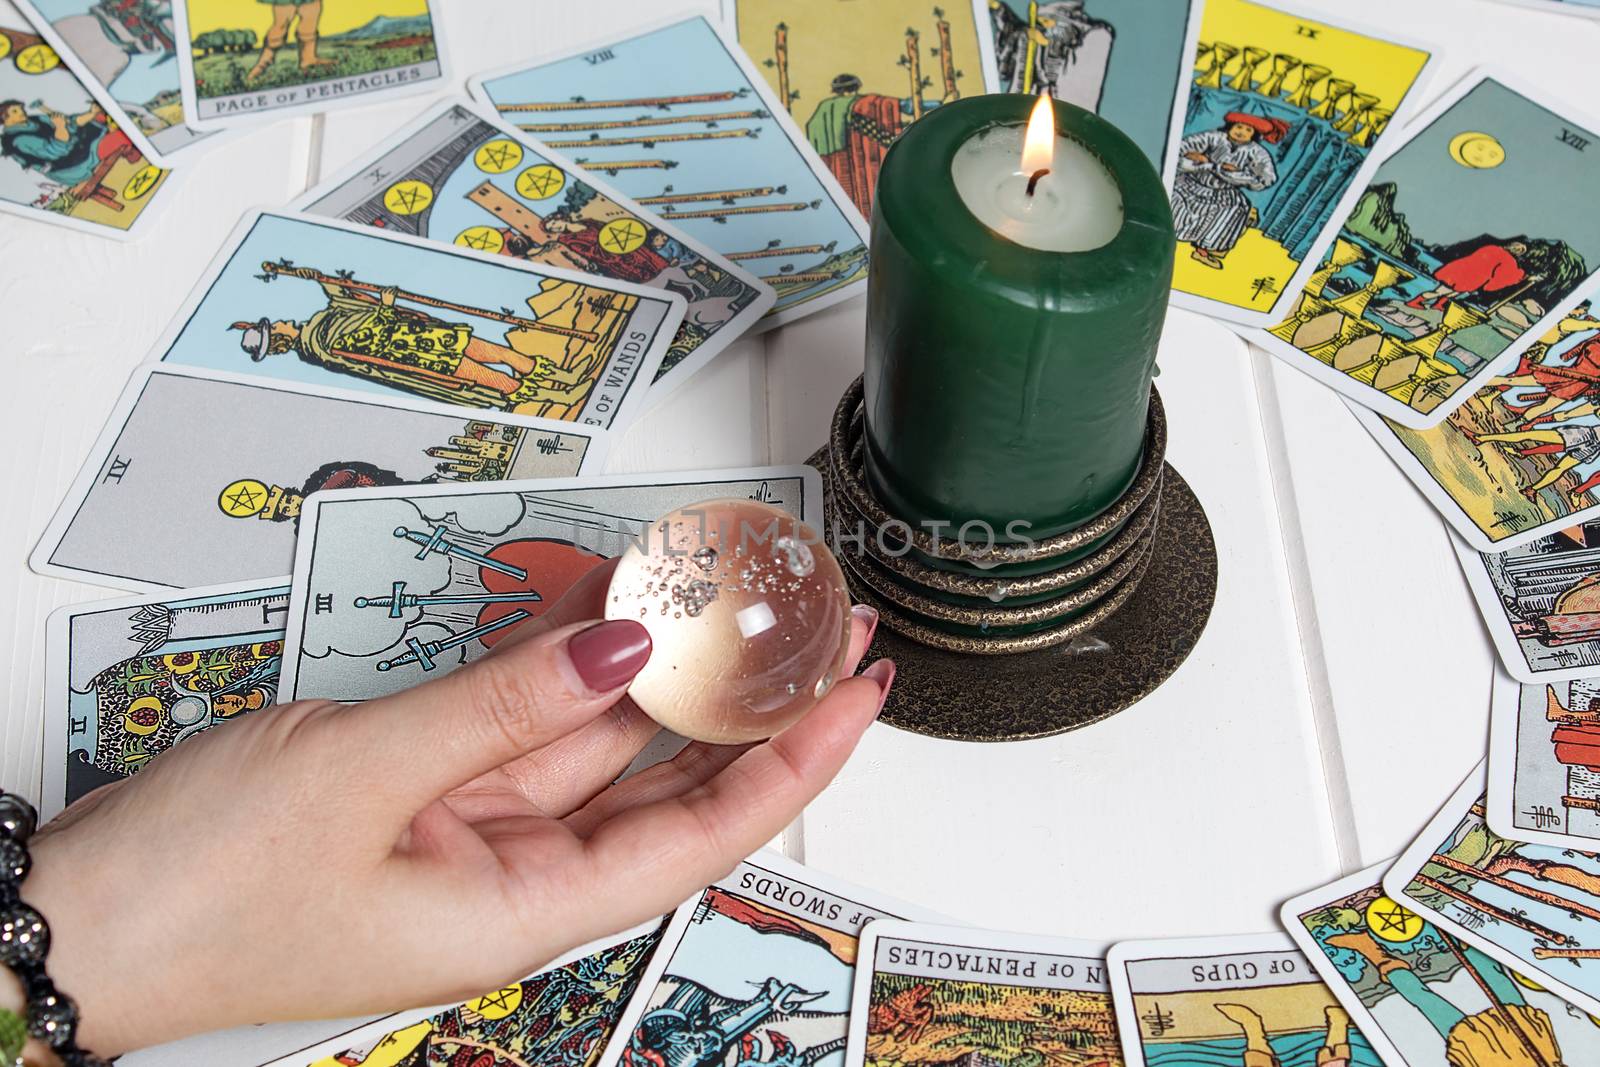 Bangkok,Thailand,March.15.20. A fortune teller holds a magic ball.On the table are fortune-telling cards and lighted candle.Magic sessions with clairvoyance cards.Reading maps by candlelight